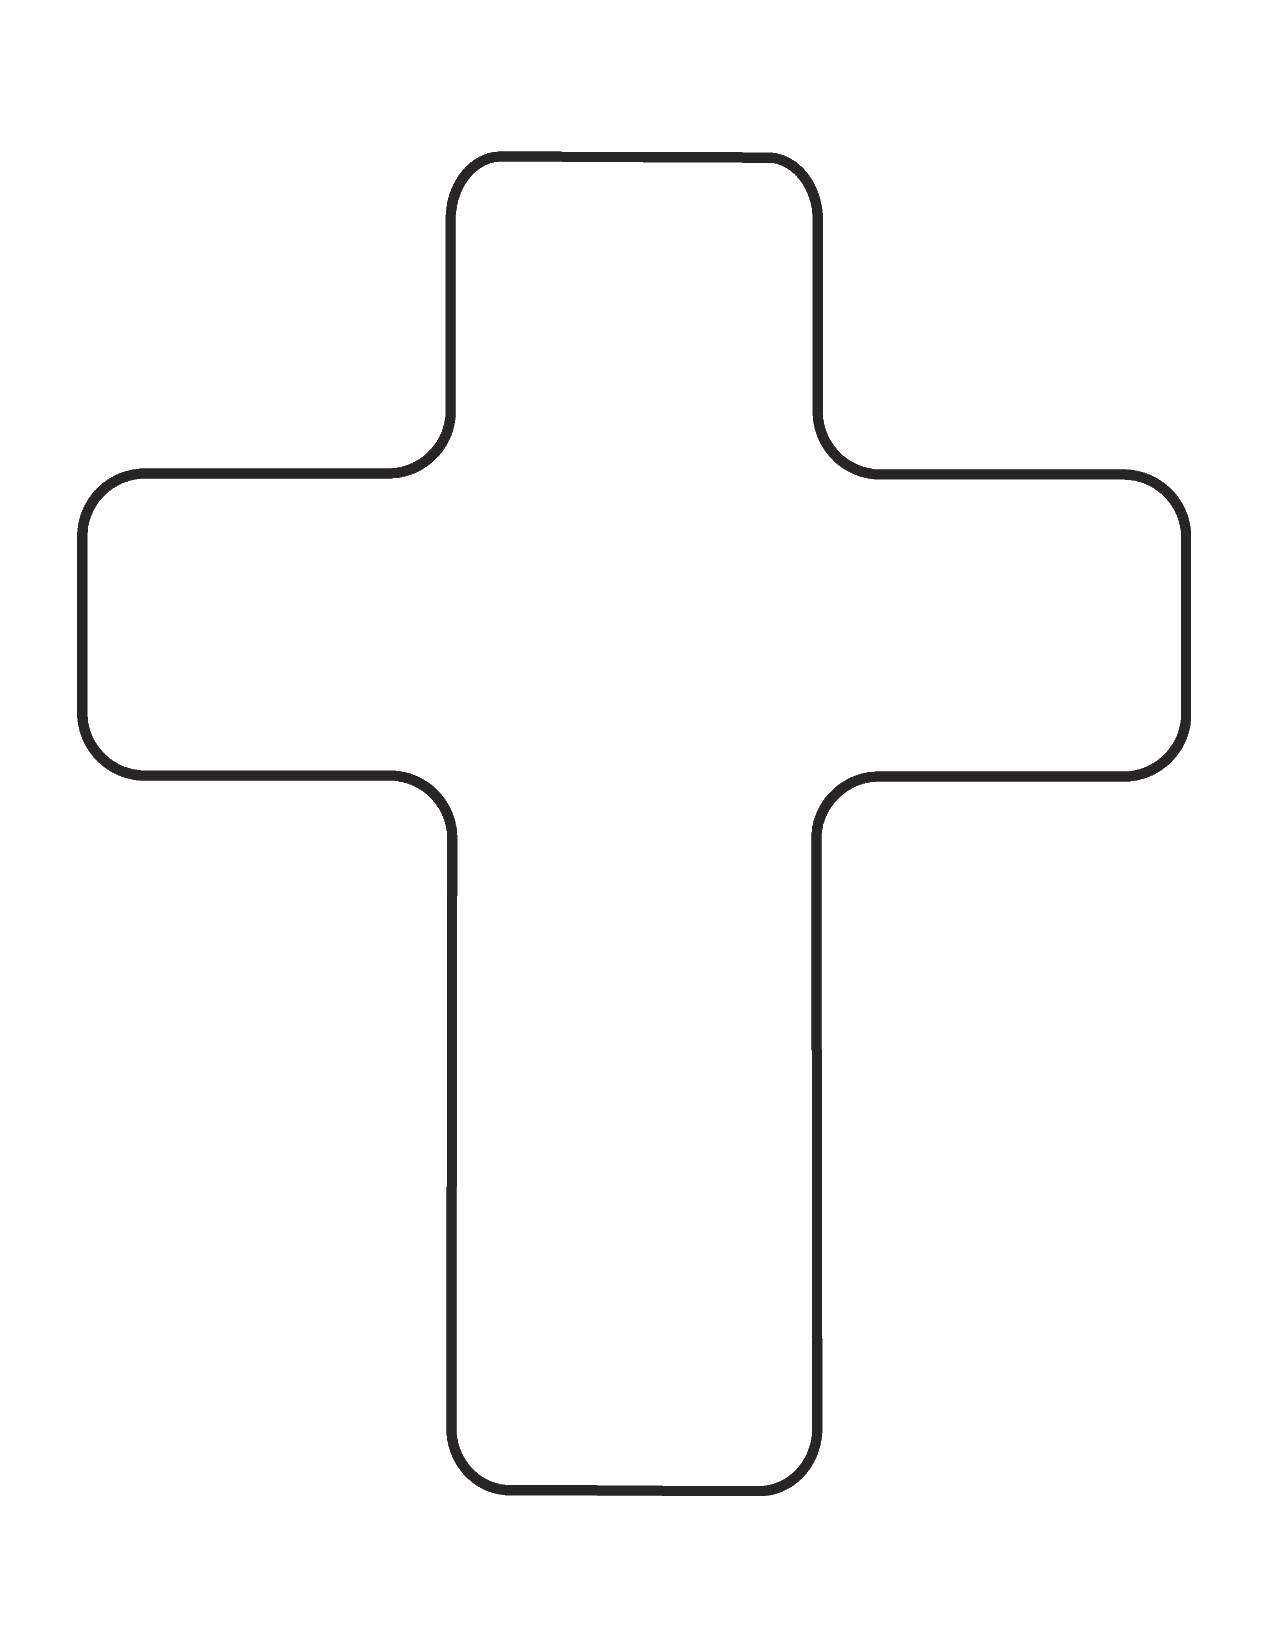 Coloring The outline of the cross. Category coloring pages cross. Tags:  contour, cross.